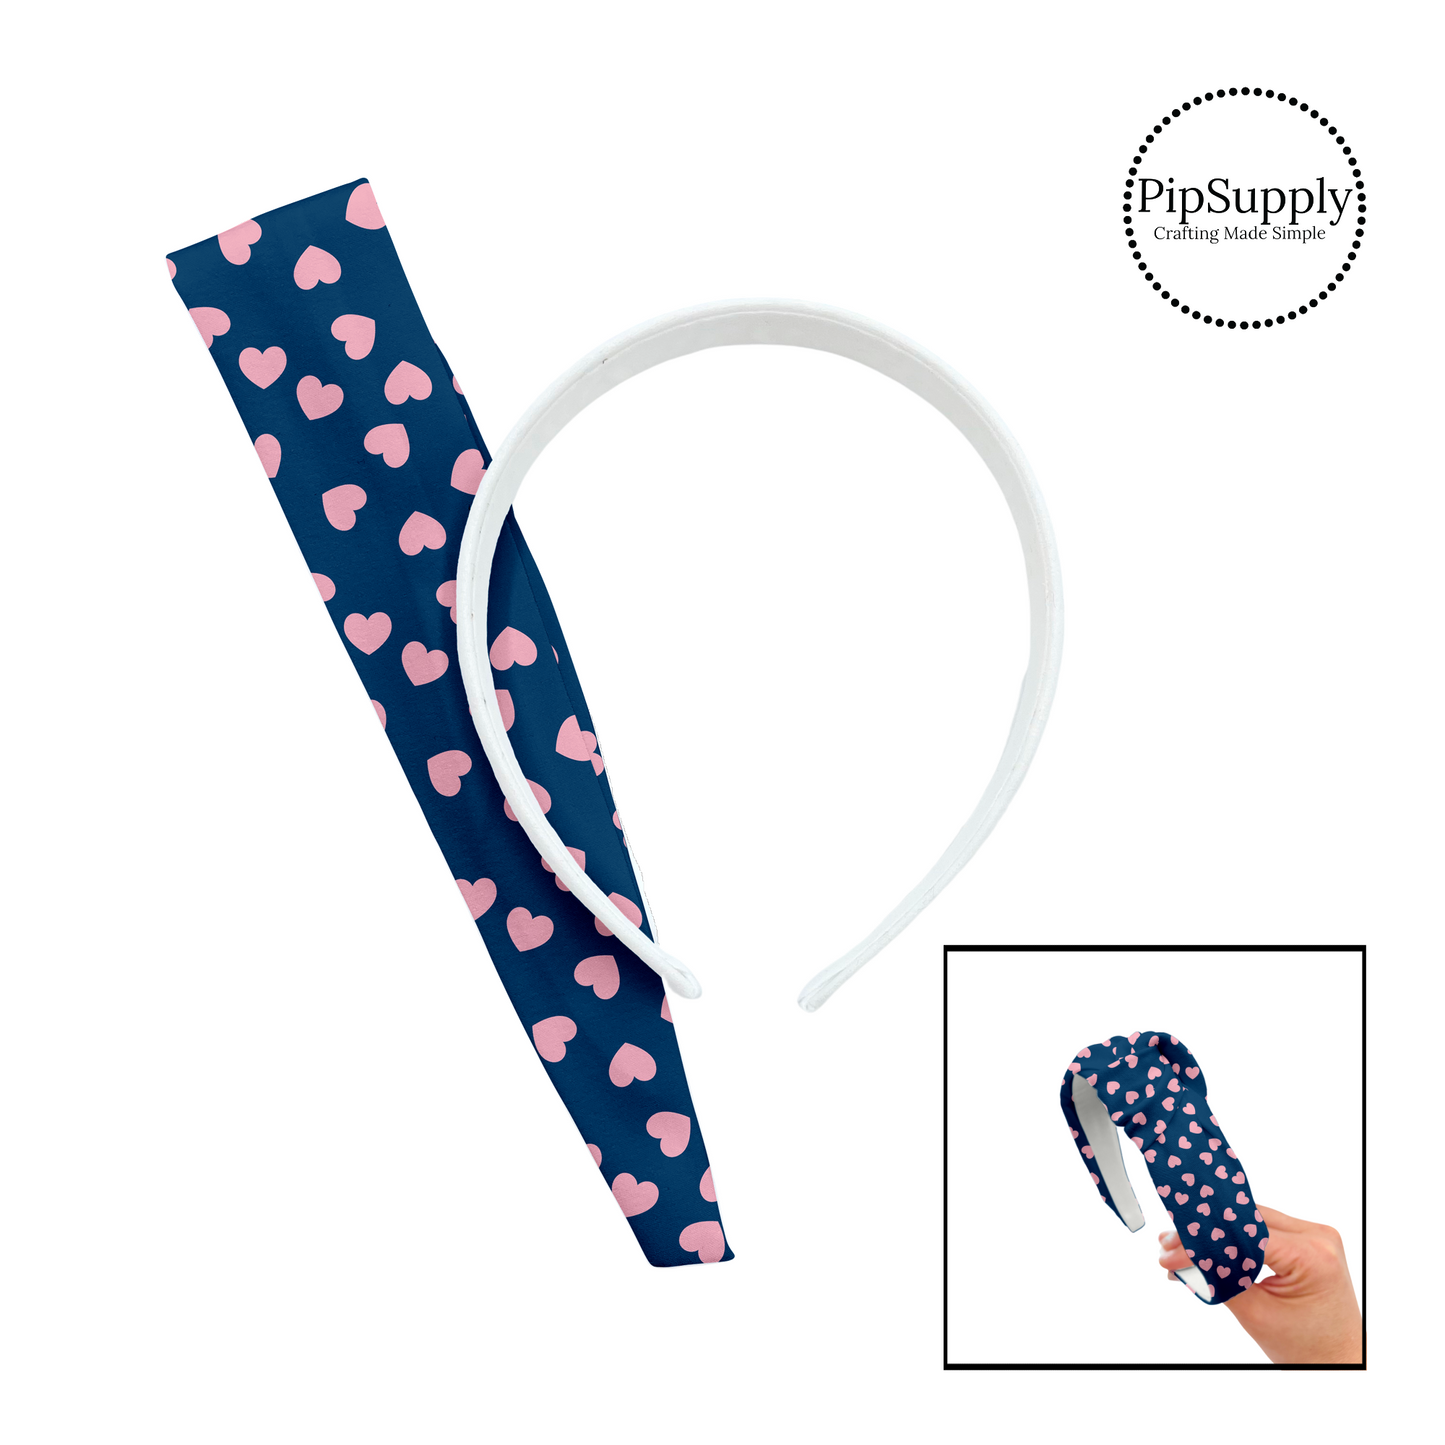 Light pink hearts in various directions on navy blue DIY knotted headband kit.